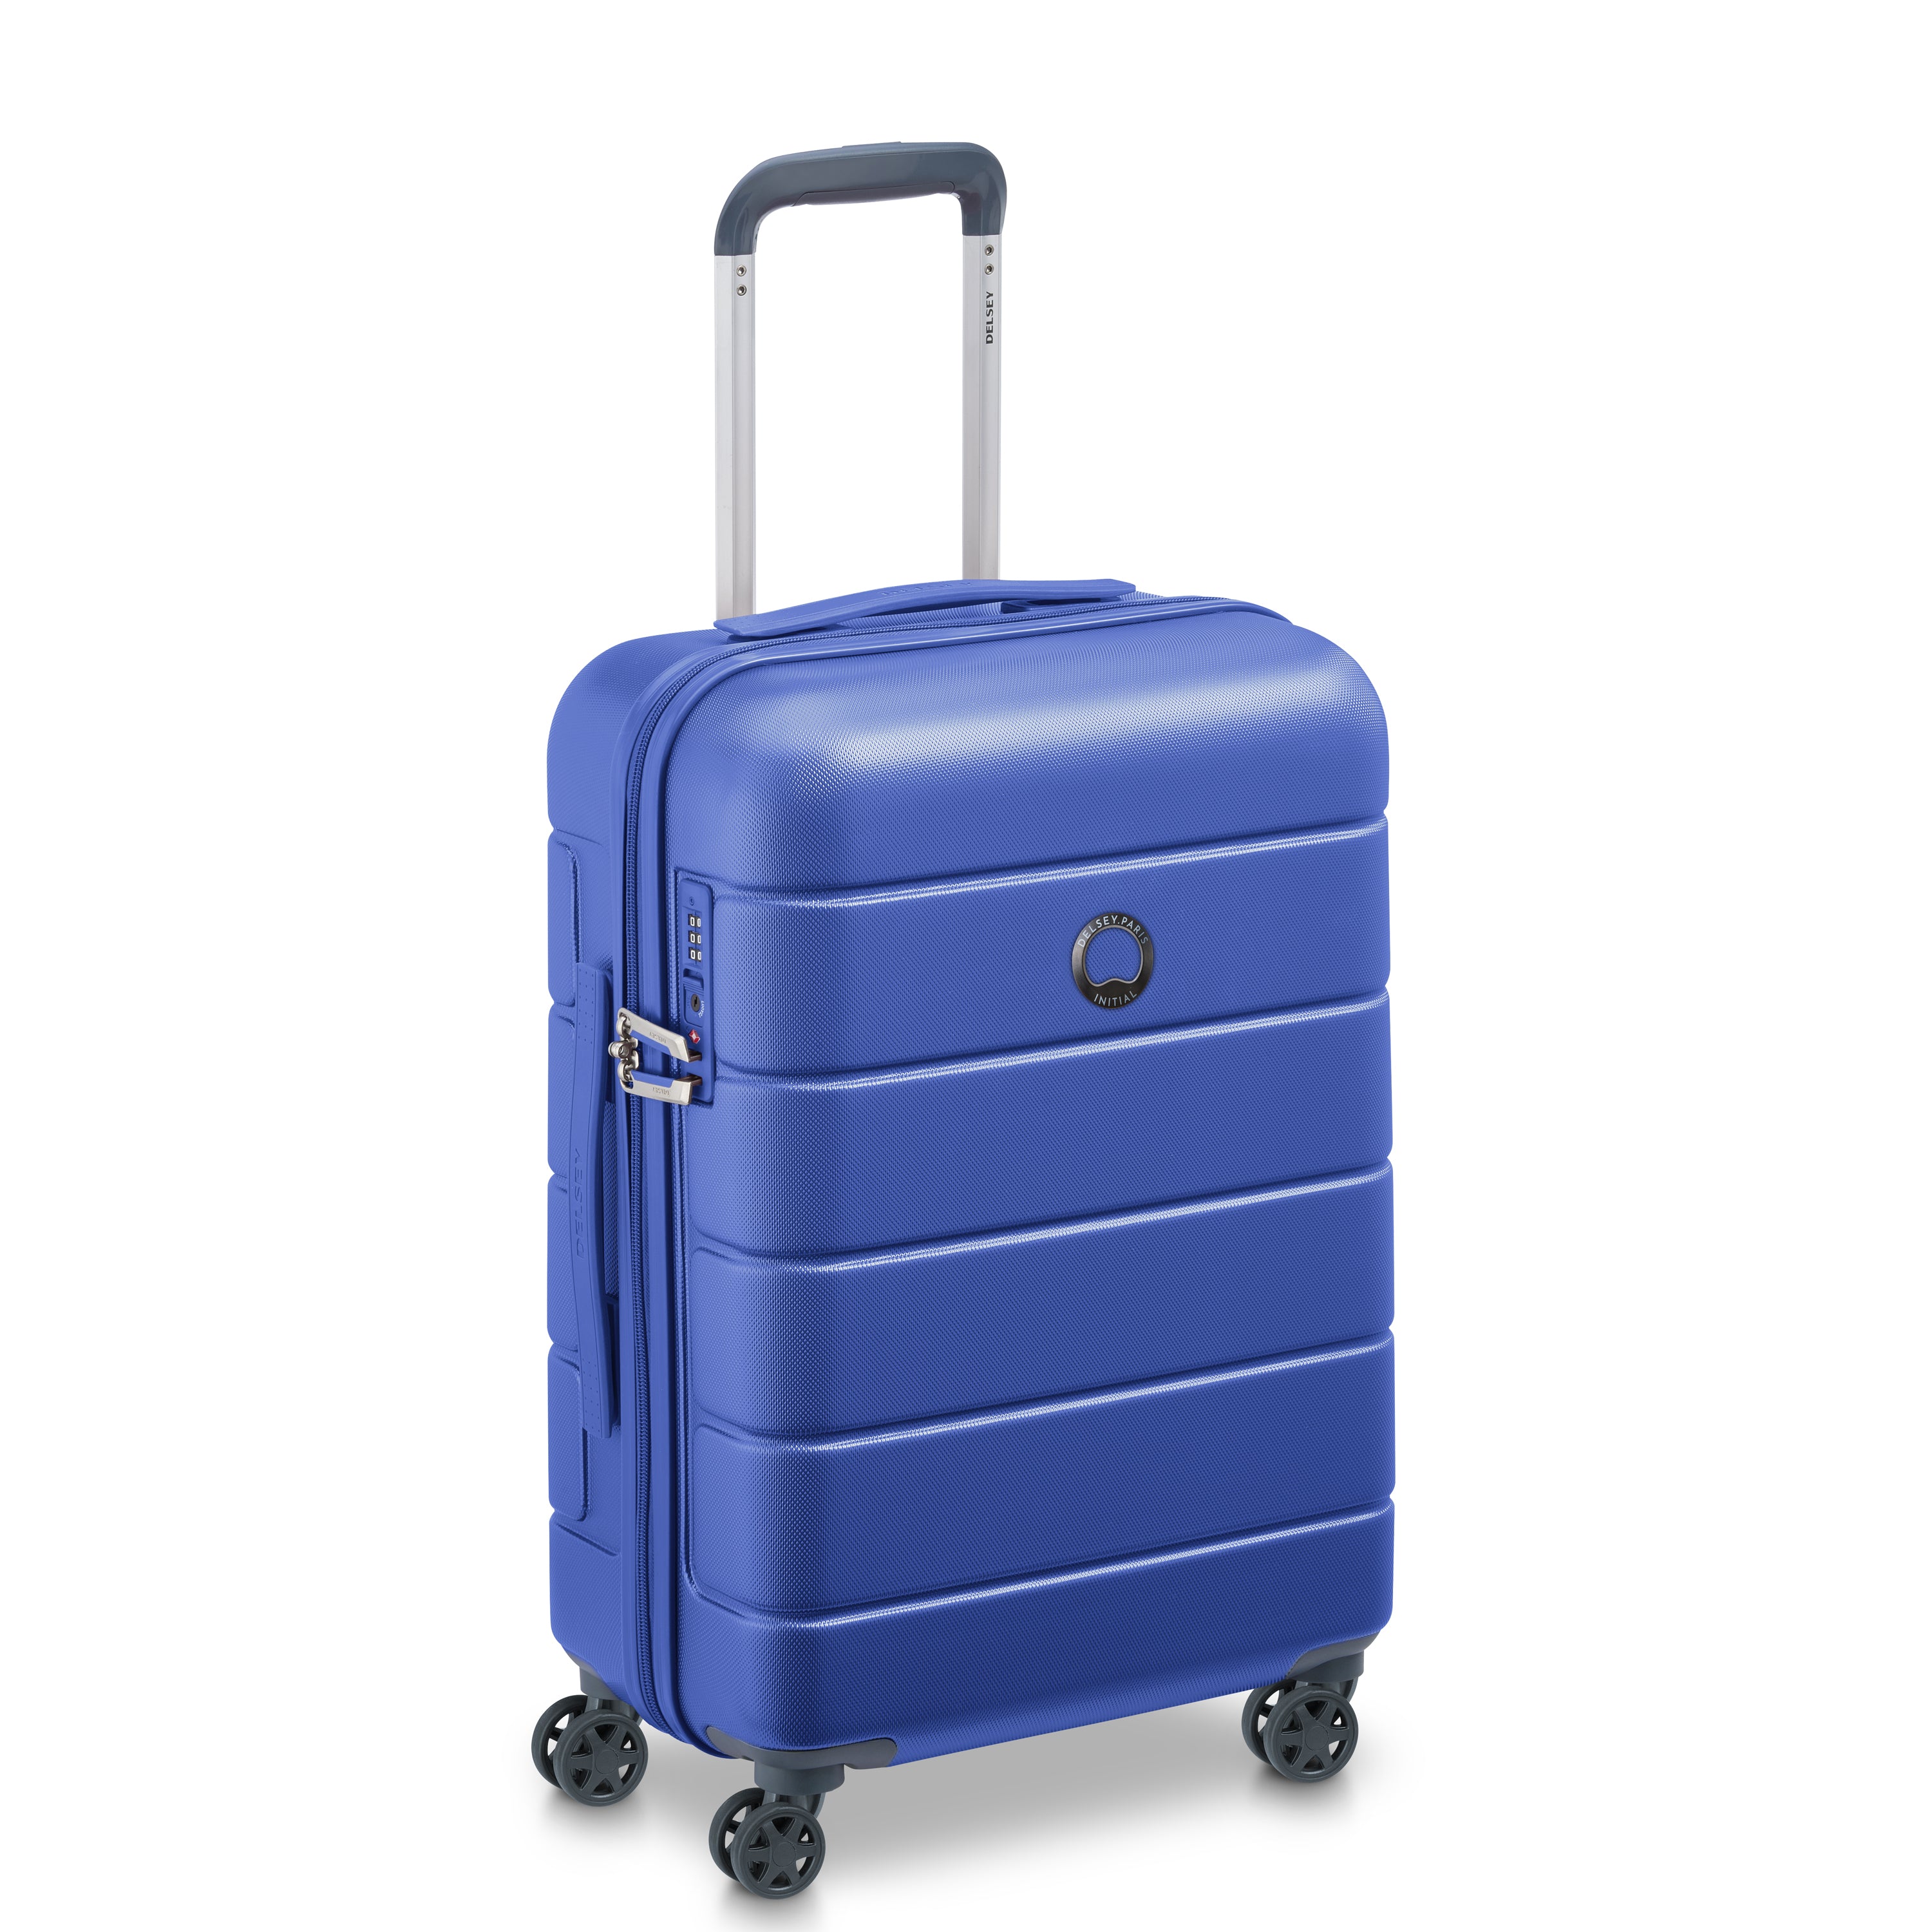 Delsey Lagos 55cm Hardcase Expandable  4 Double Wheel Cabin Luggage Trolley Case Deep Blue - 00387080122W9 